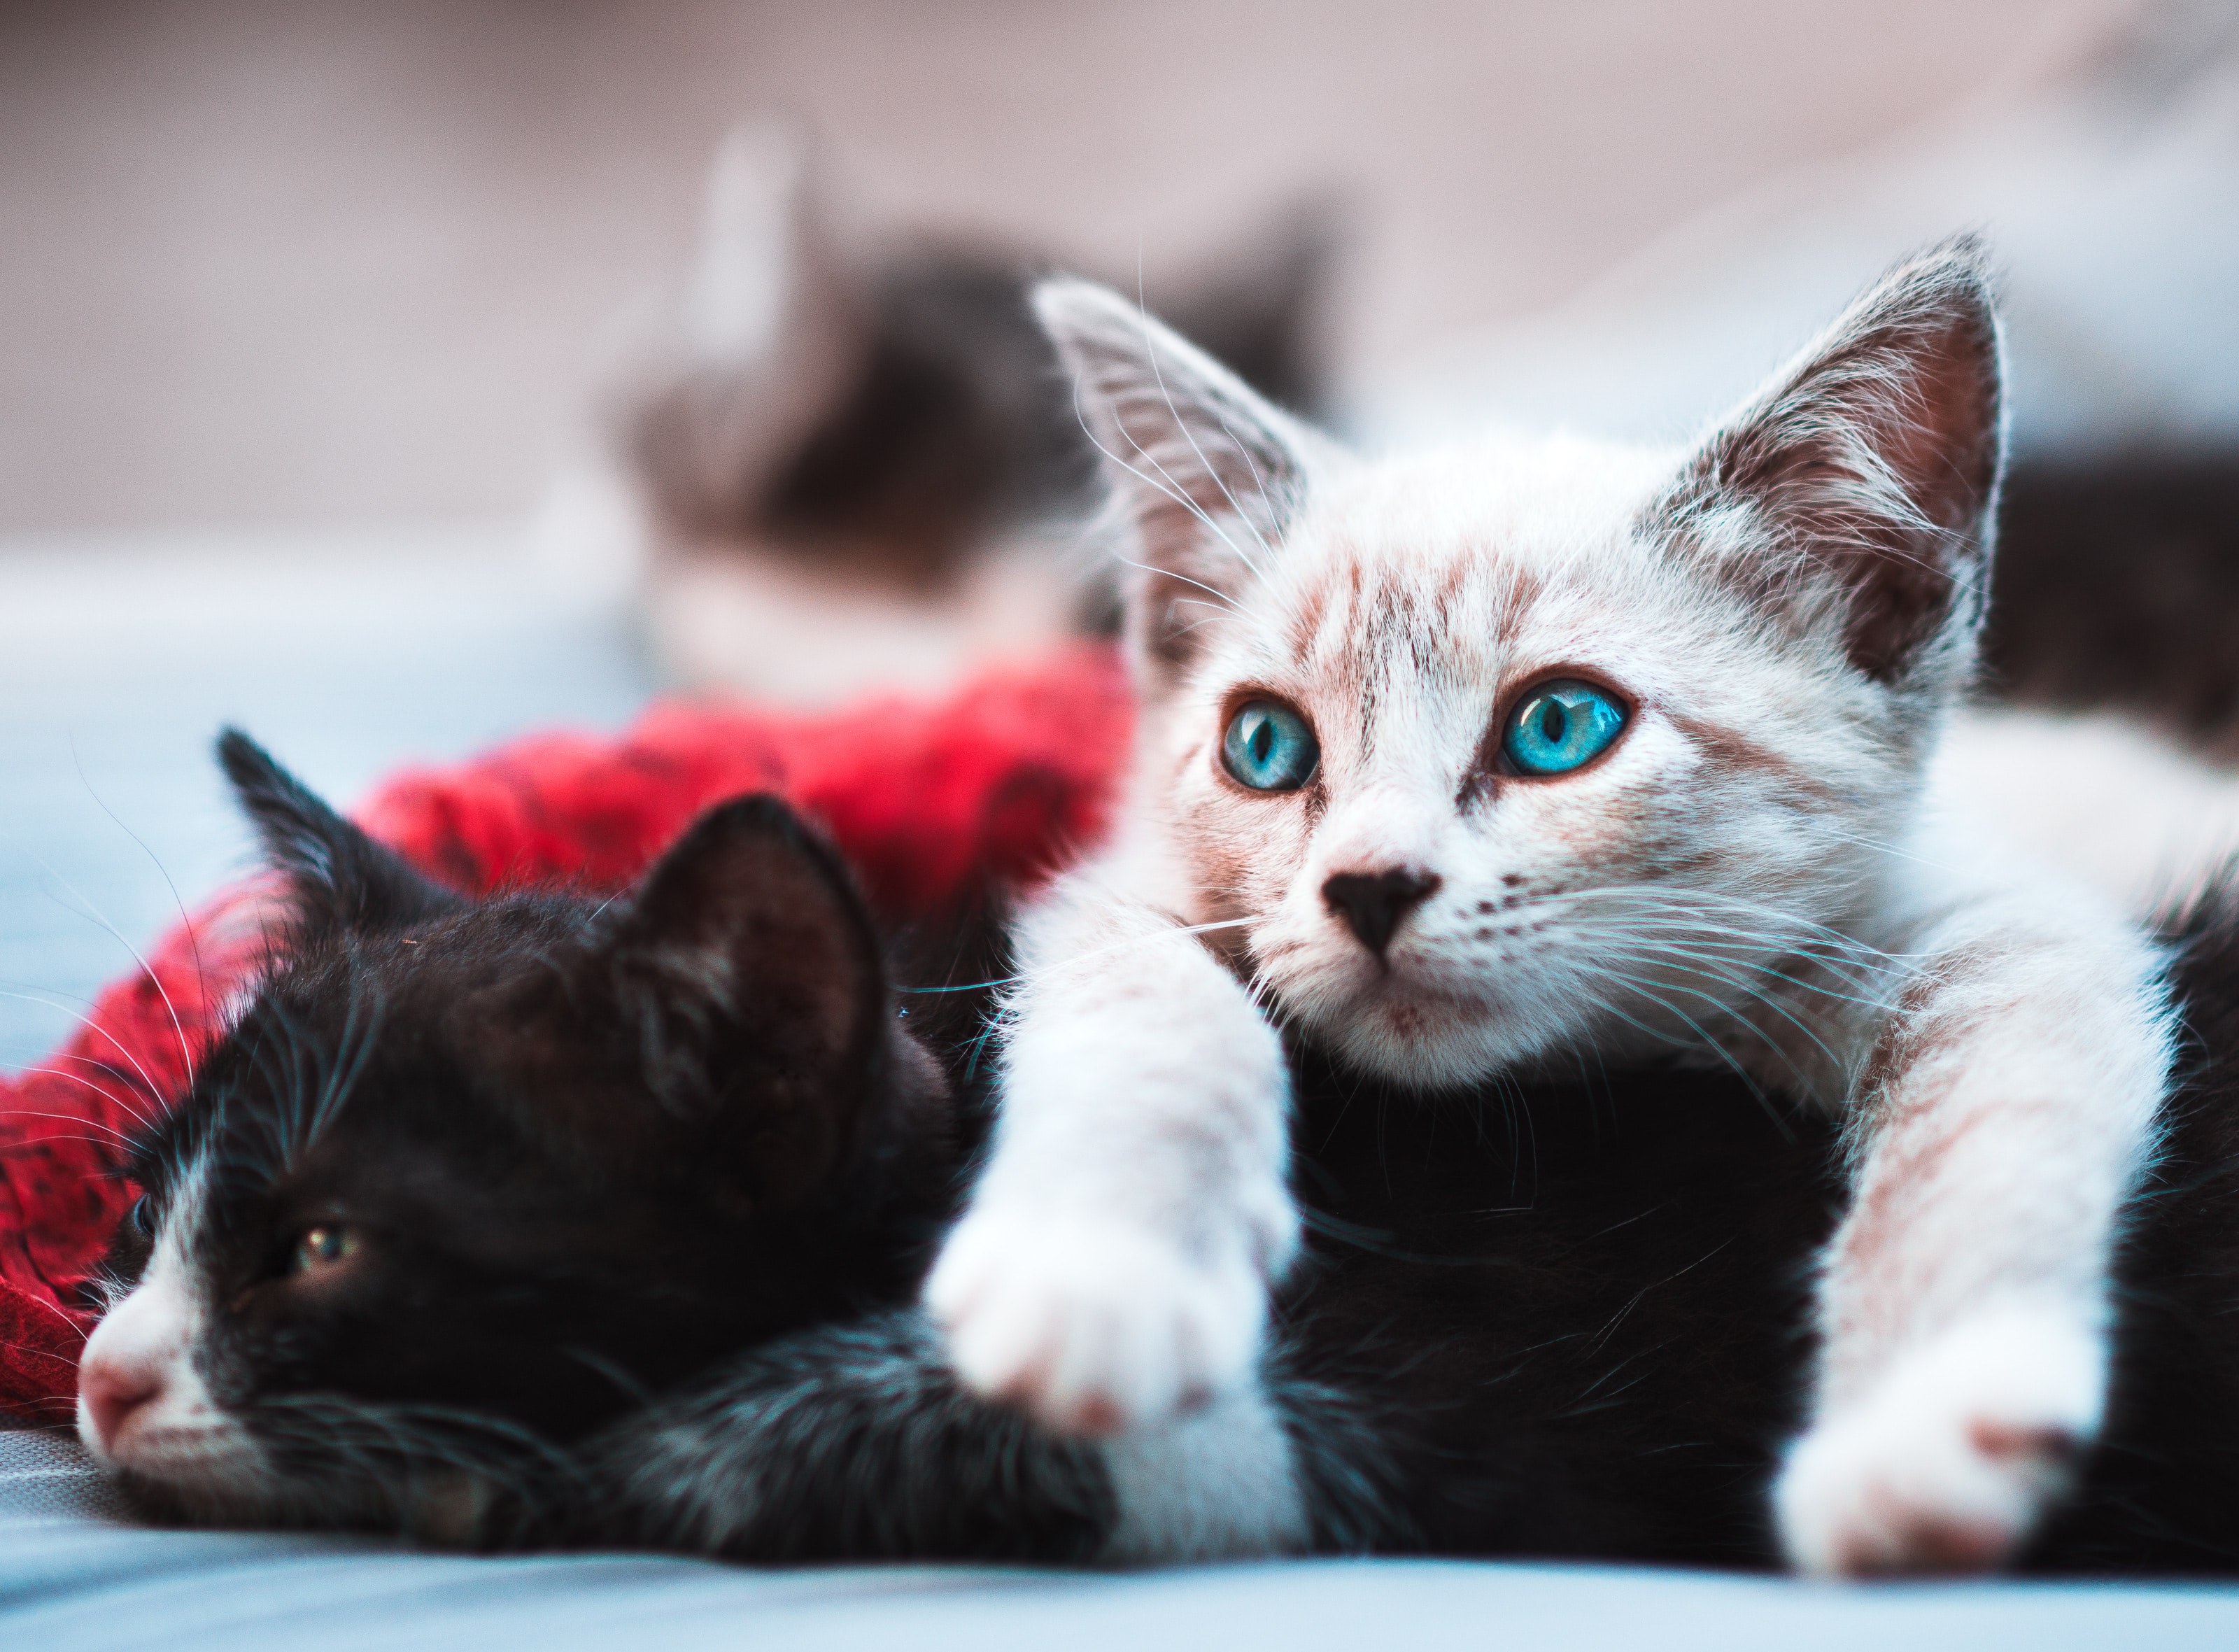 Questions to Ask While Choosing a Cat Breeder